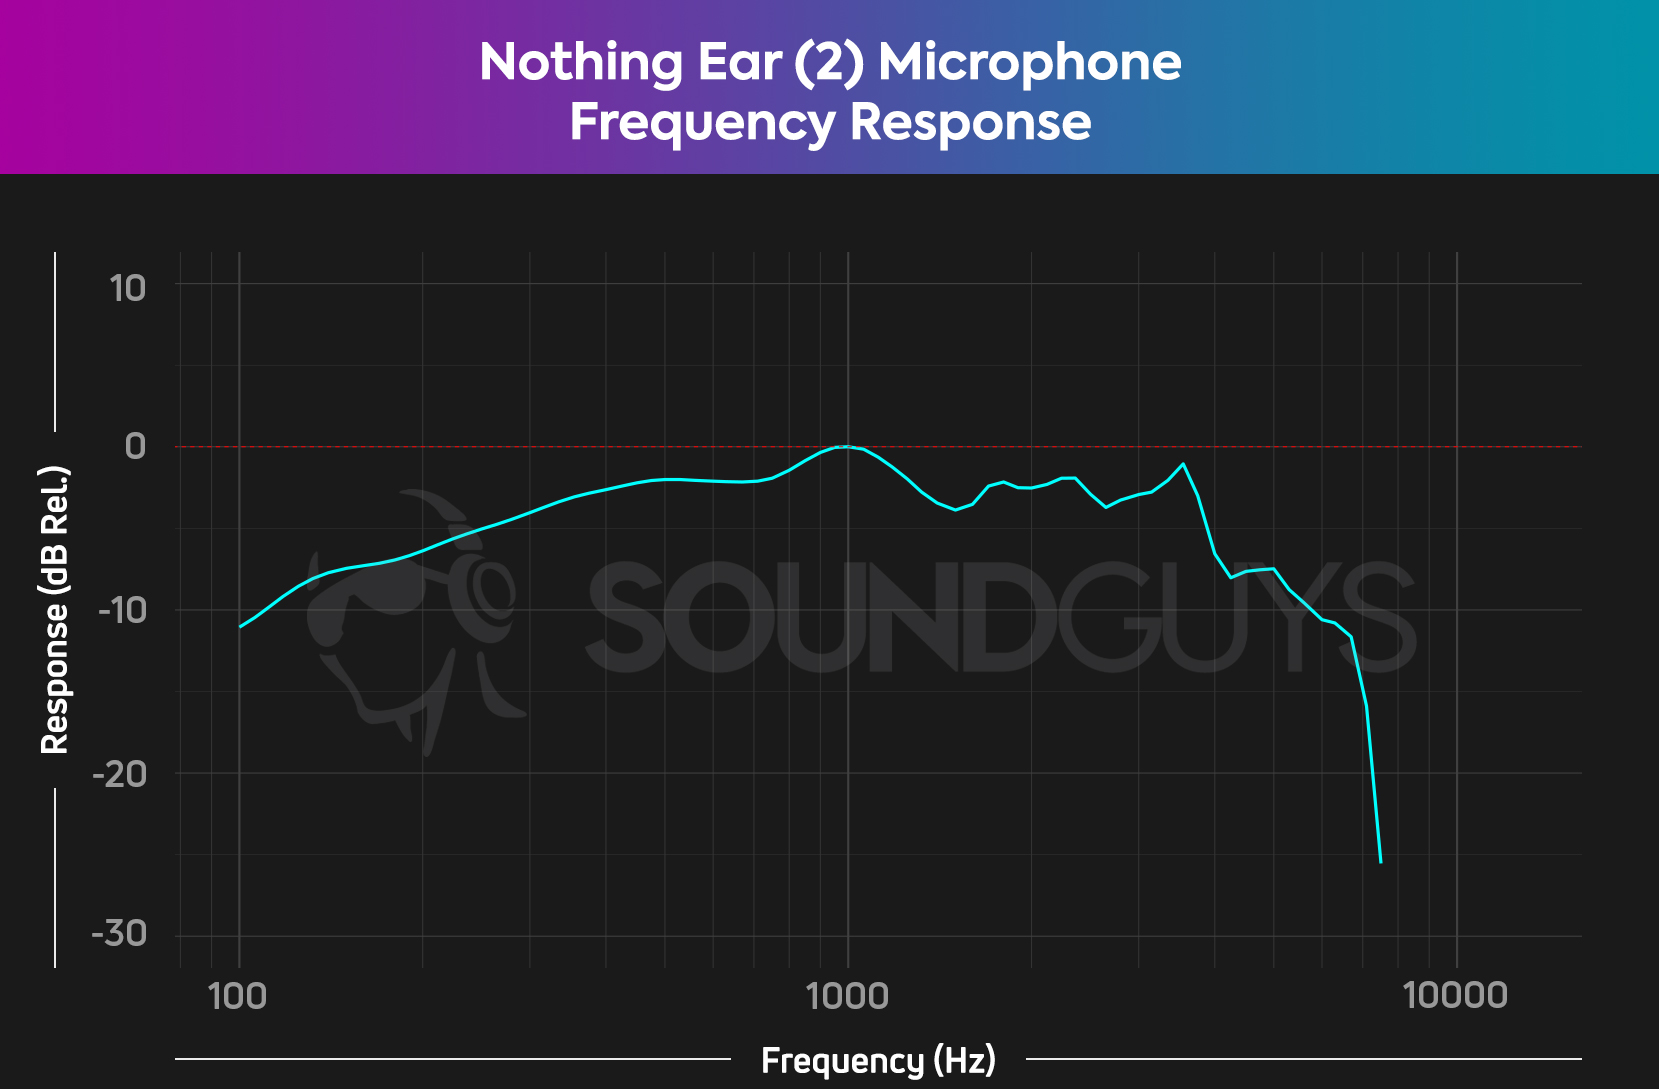 The microphone frequency response of the Nothing Ear (2) shown in a chart.